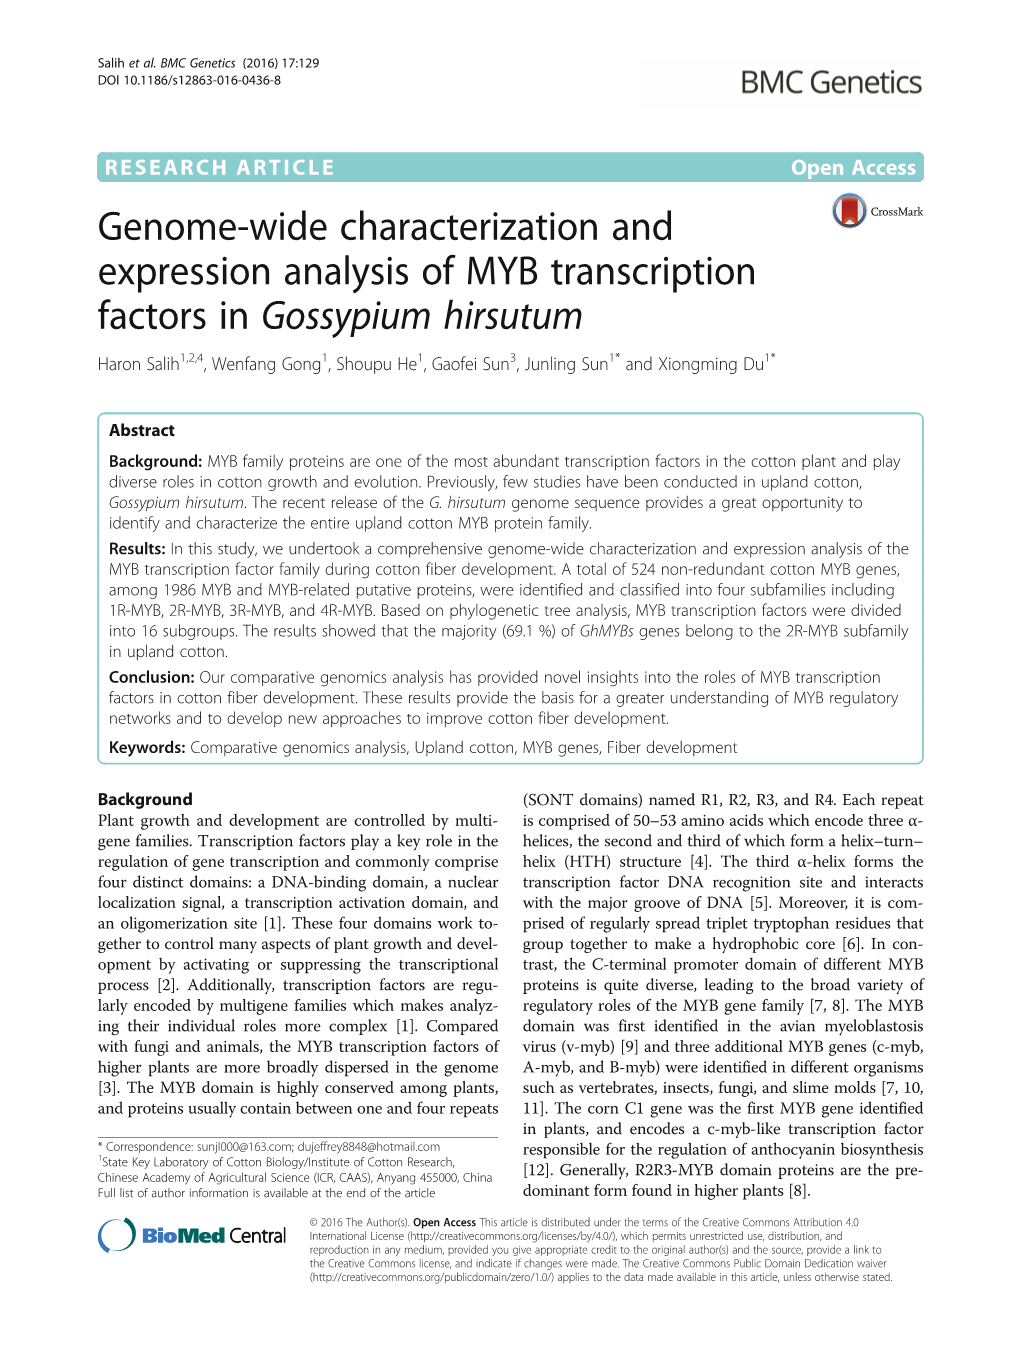 Genome-Wide Characterization and Expression Analysis of MYB Transcription Factors in Gossypium Hirsutum